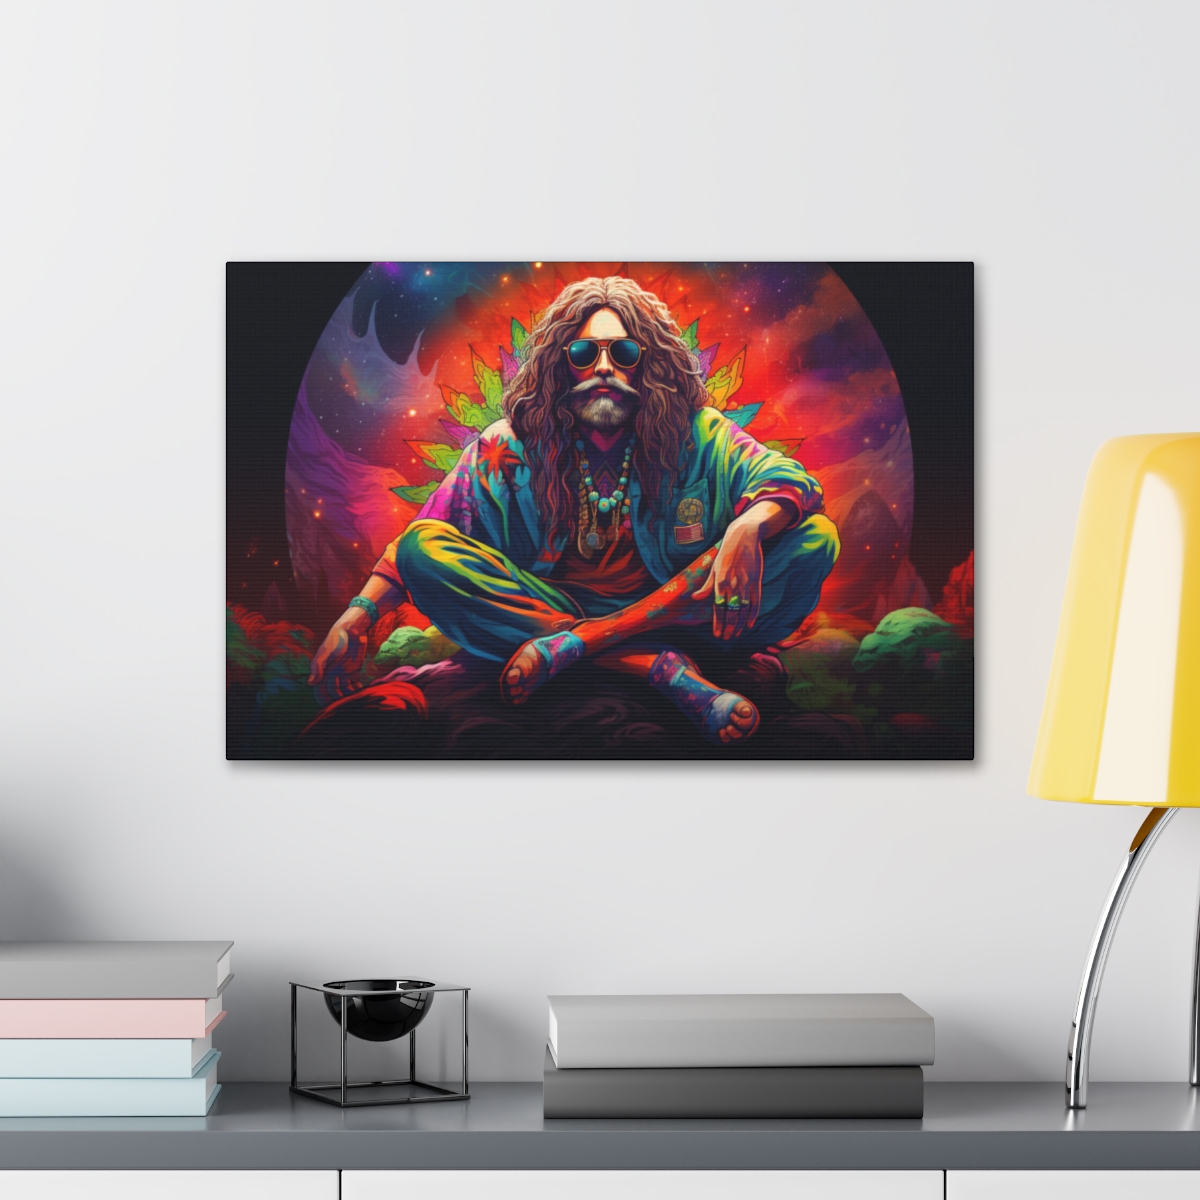 Hippie Trippy Art Canvas Print: Are You Ready For The Trippy?